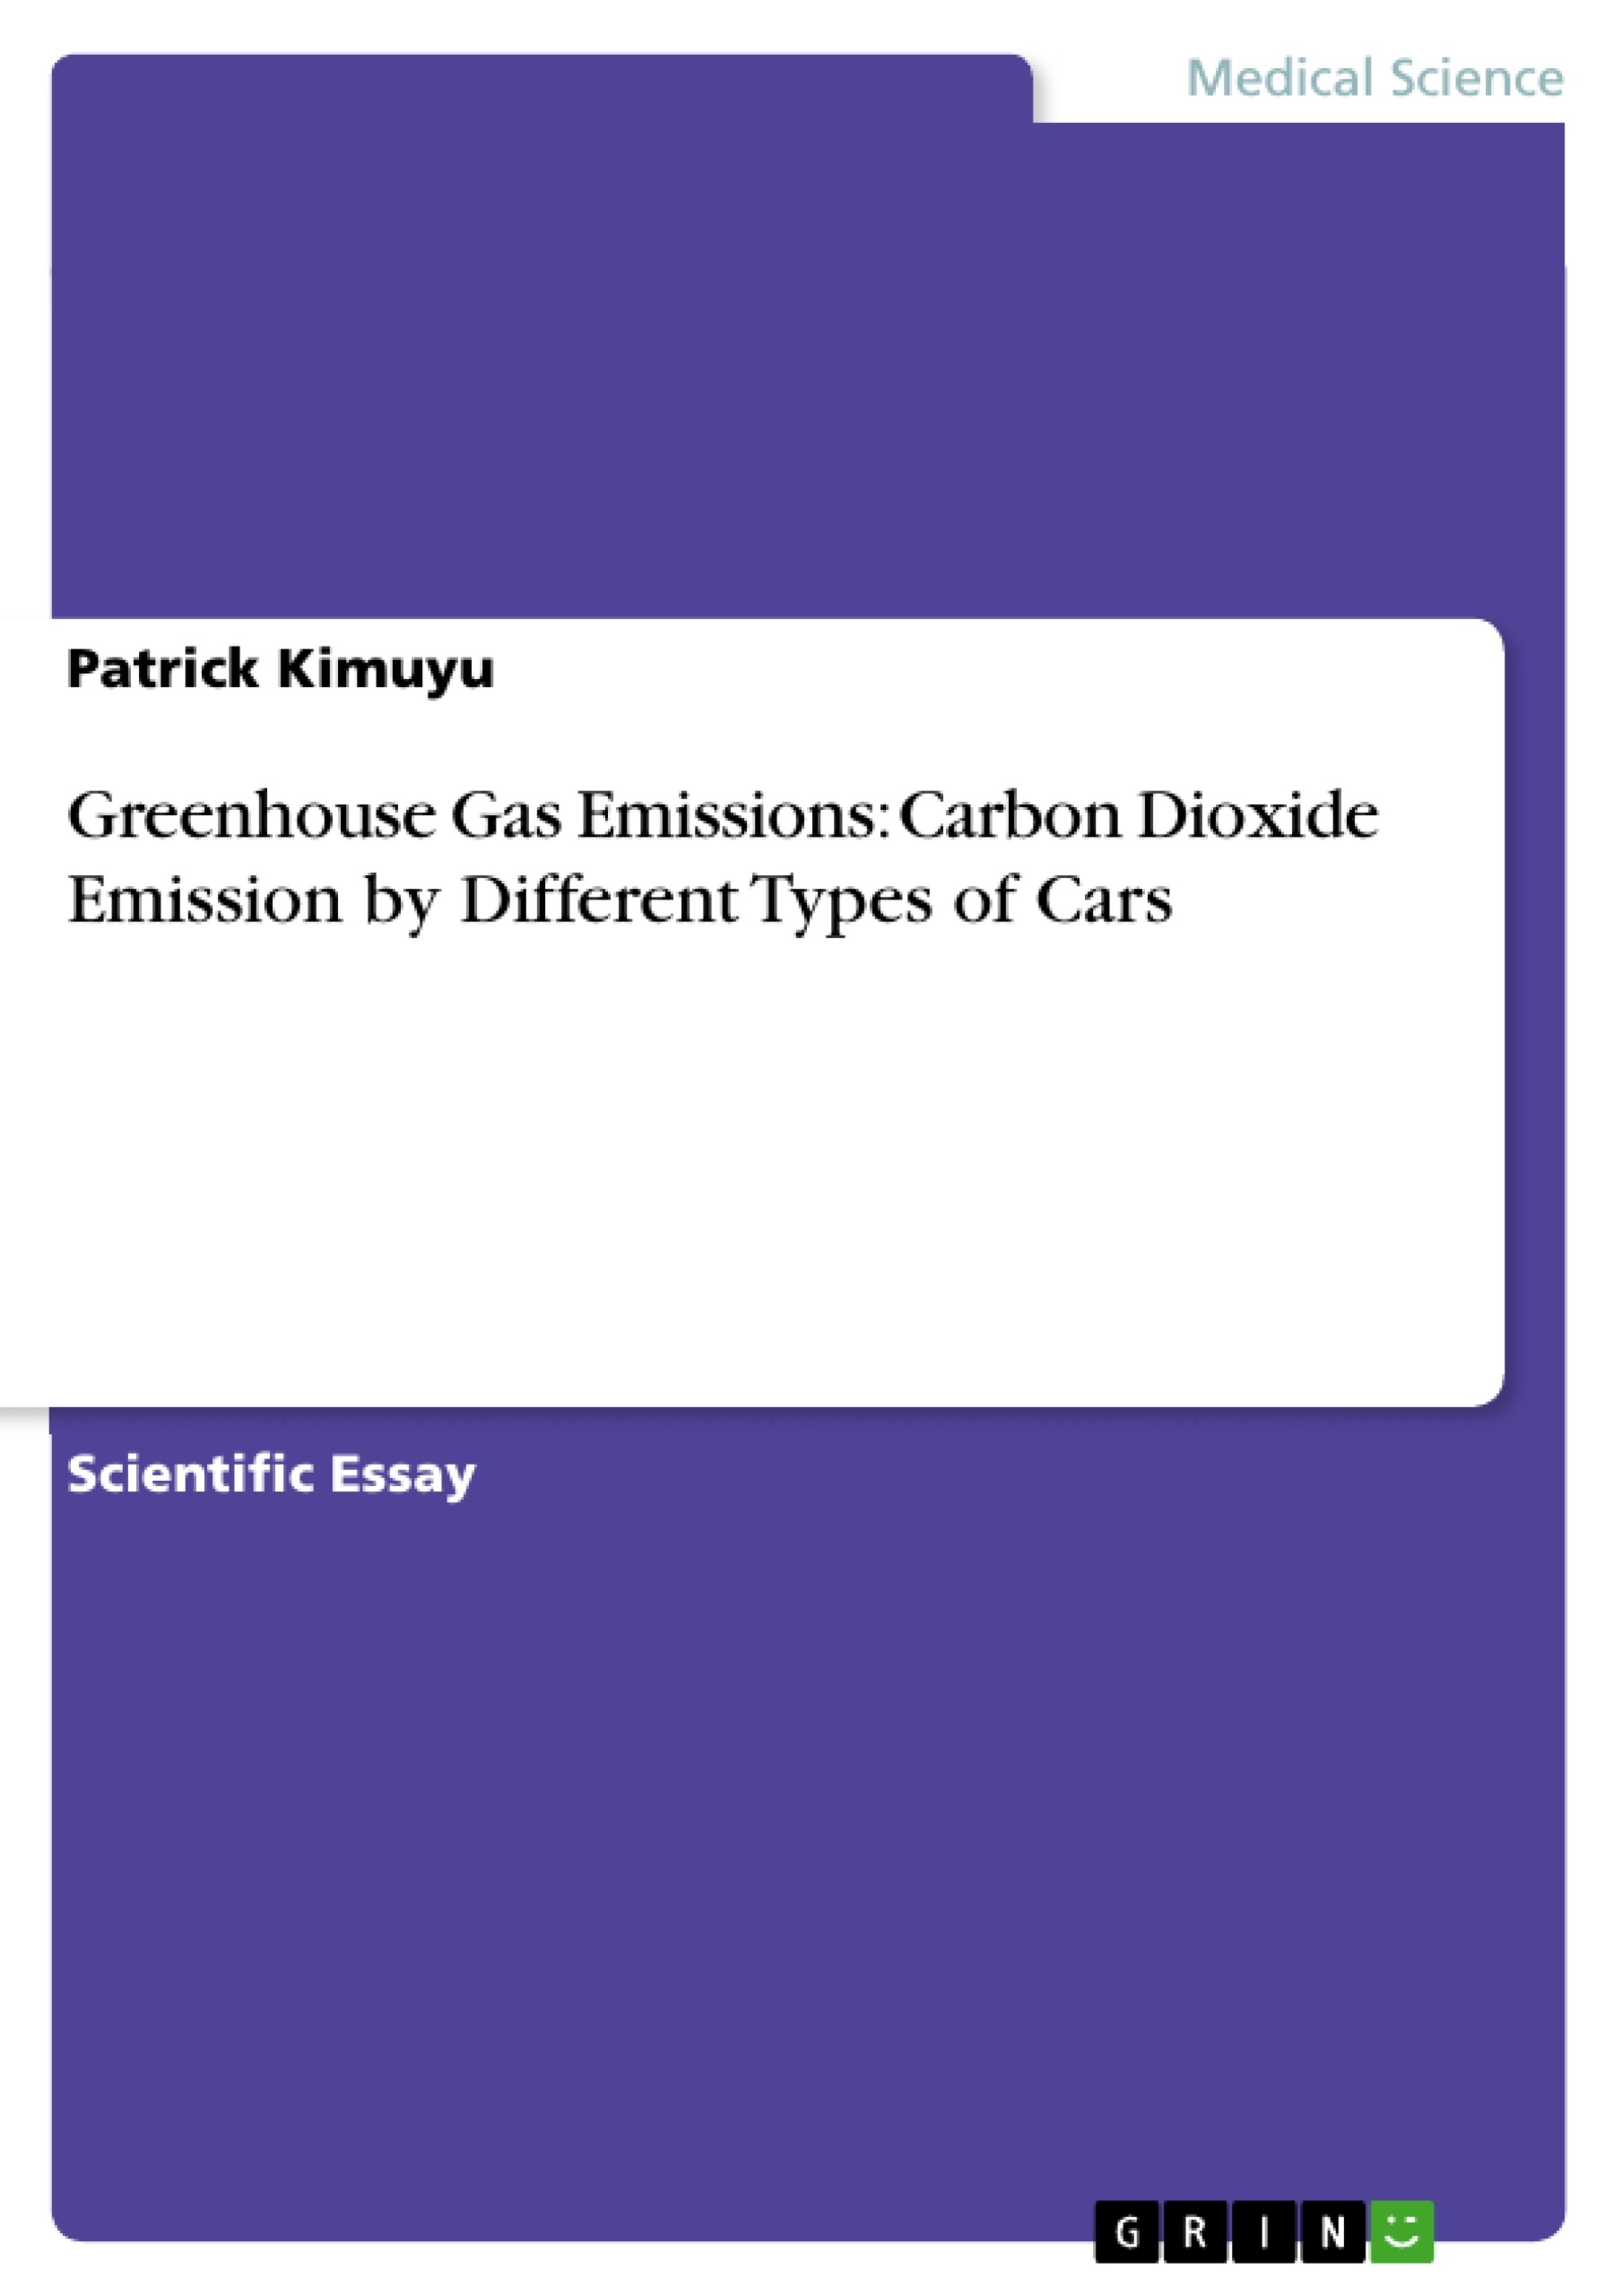 Title: Greenhouse Gas Emissions: Carbon Dioxide Emission by Different Types of Cars